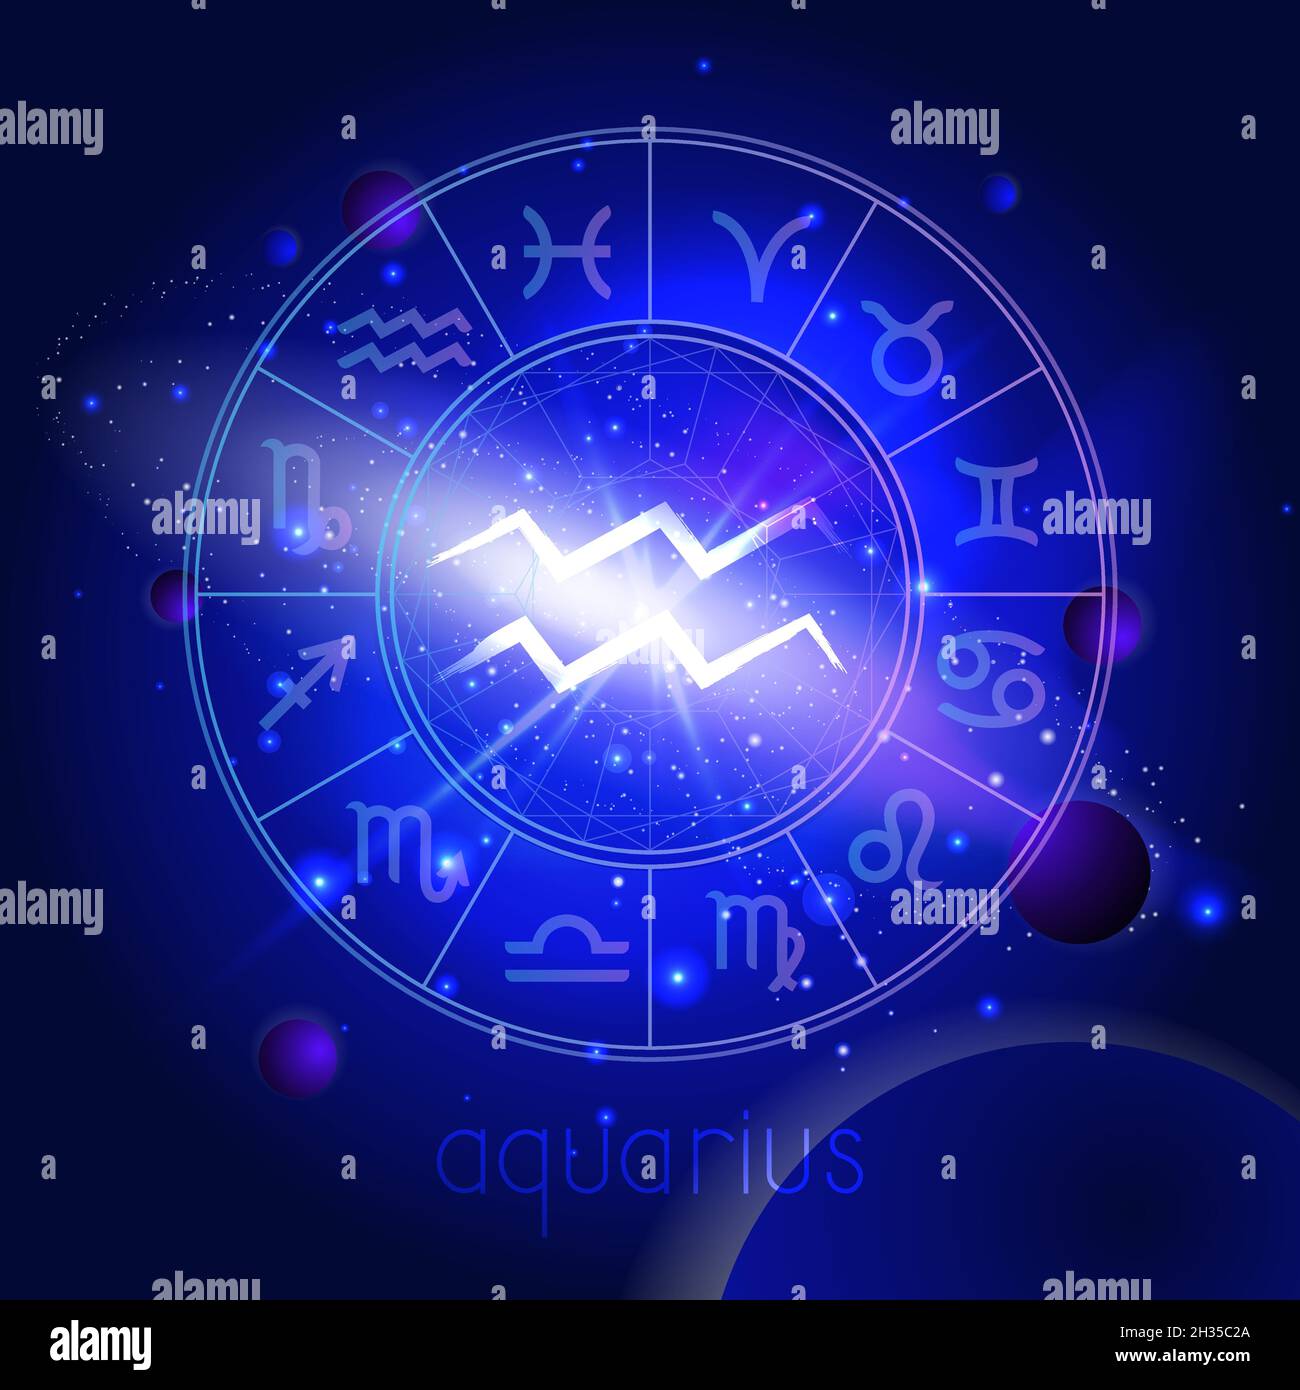 Vector illustration of sign AQUARIUS with Horoscope circle against the ...